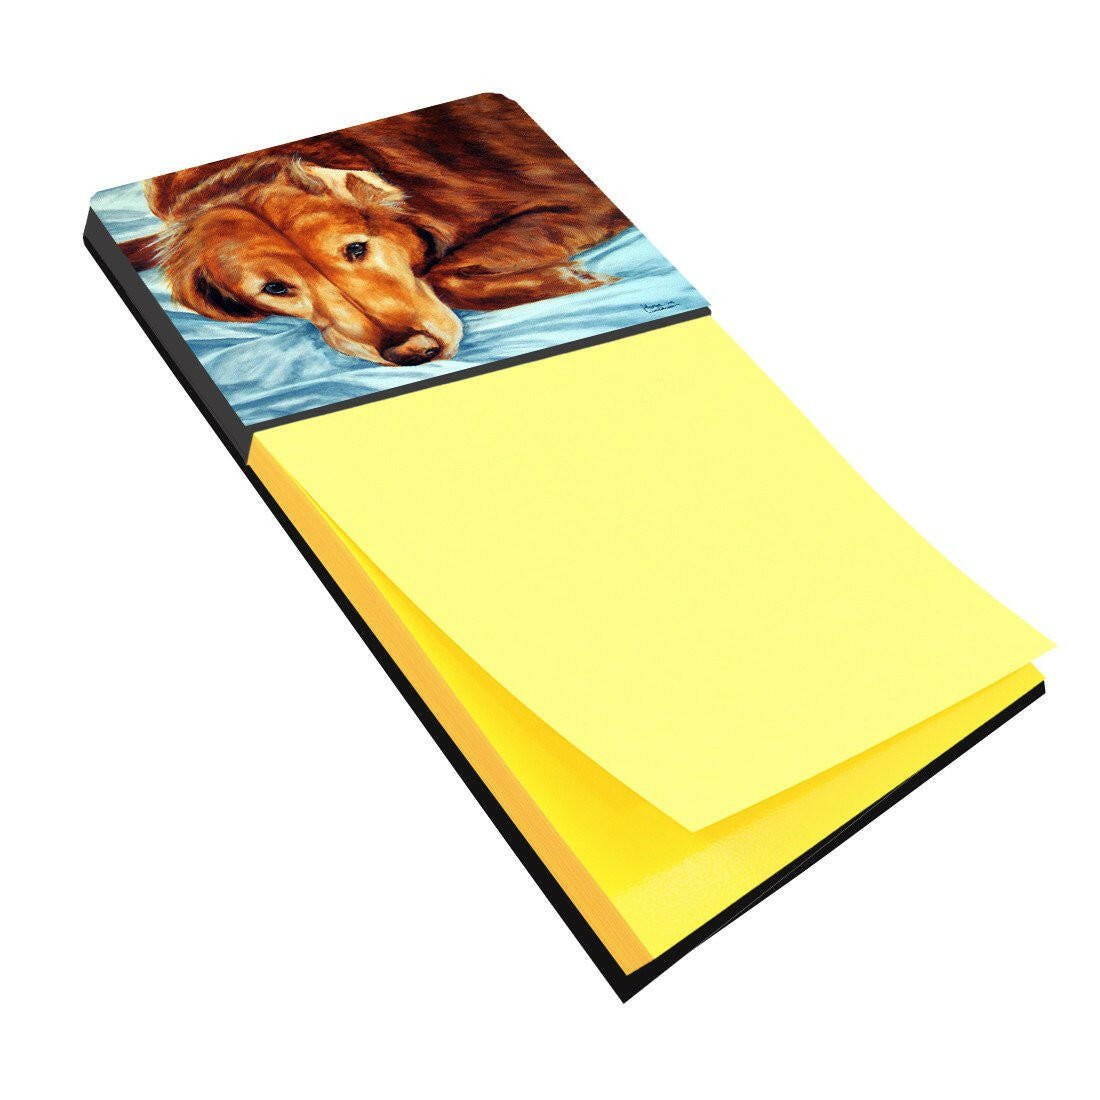 Golden Retriever by Tanya and Craig Amberson Sticky Note Holder AMB1040SN by Caroline's Treasures